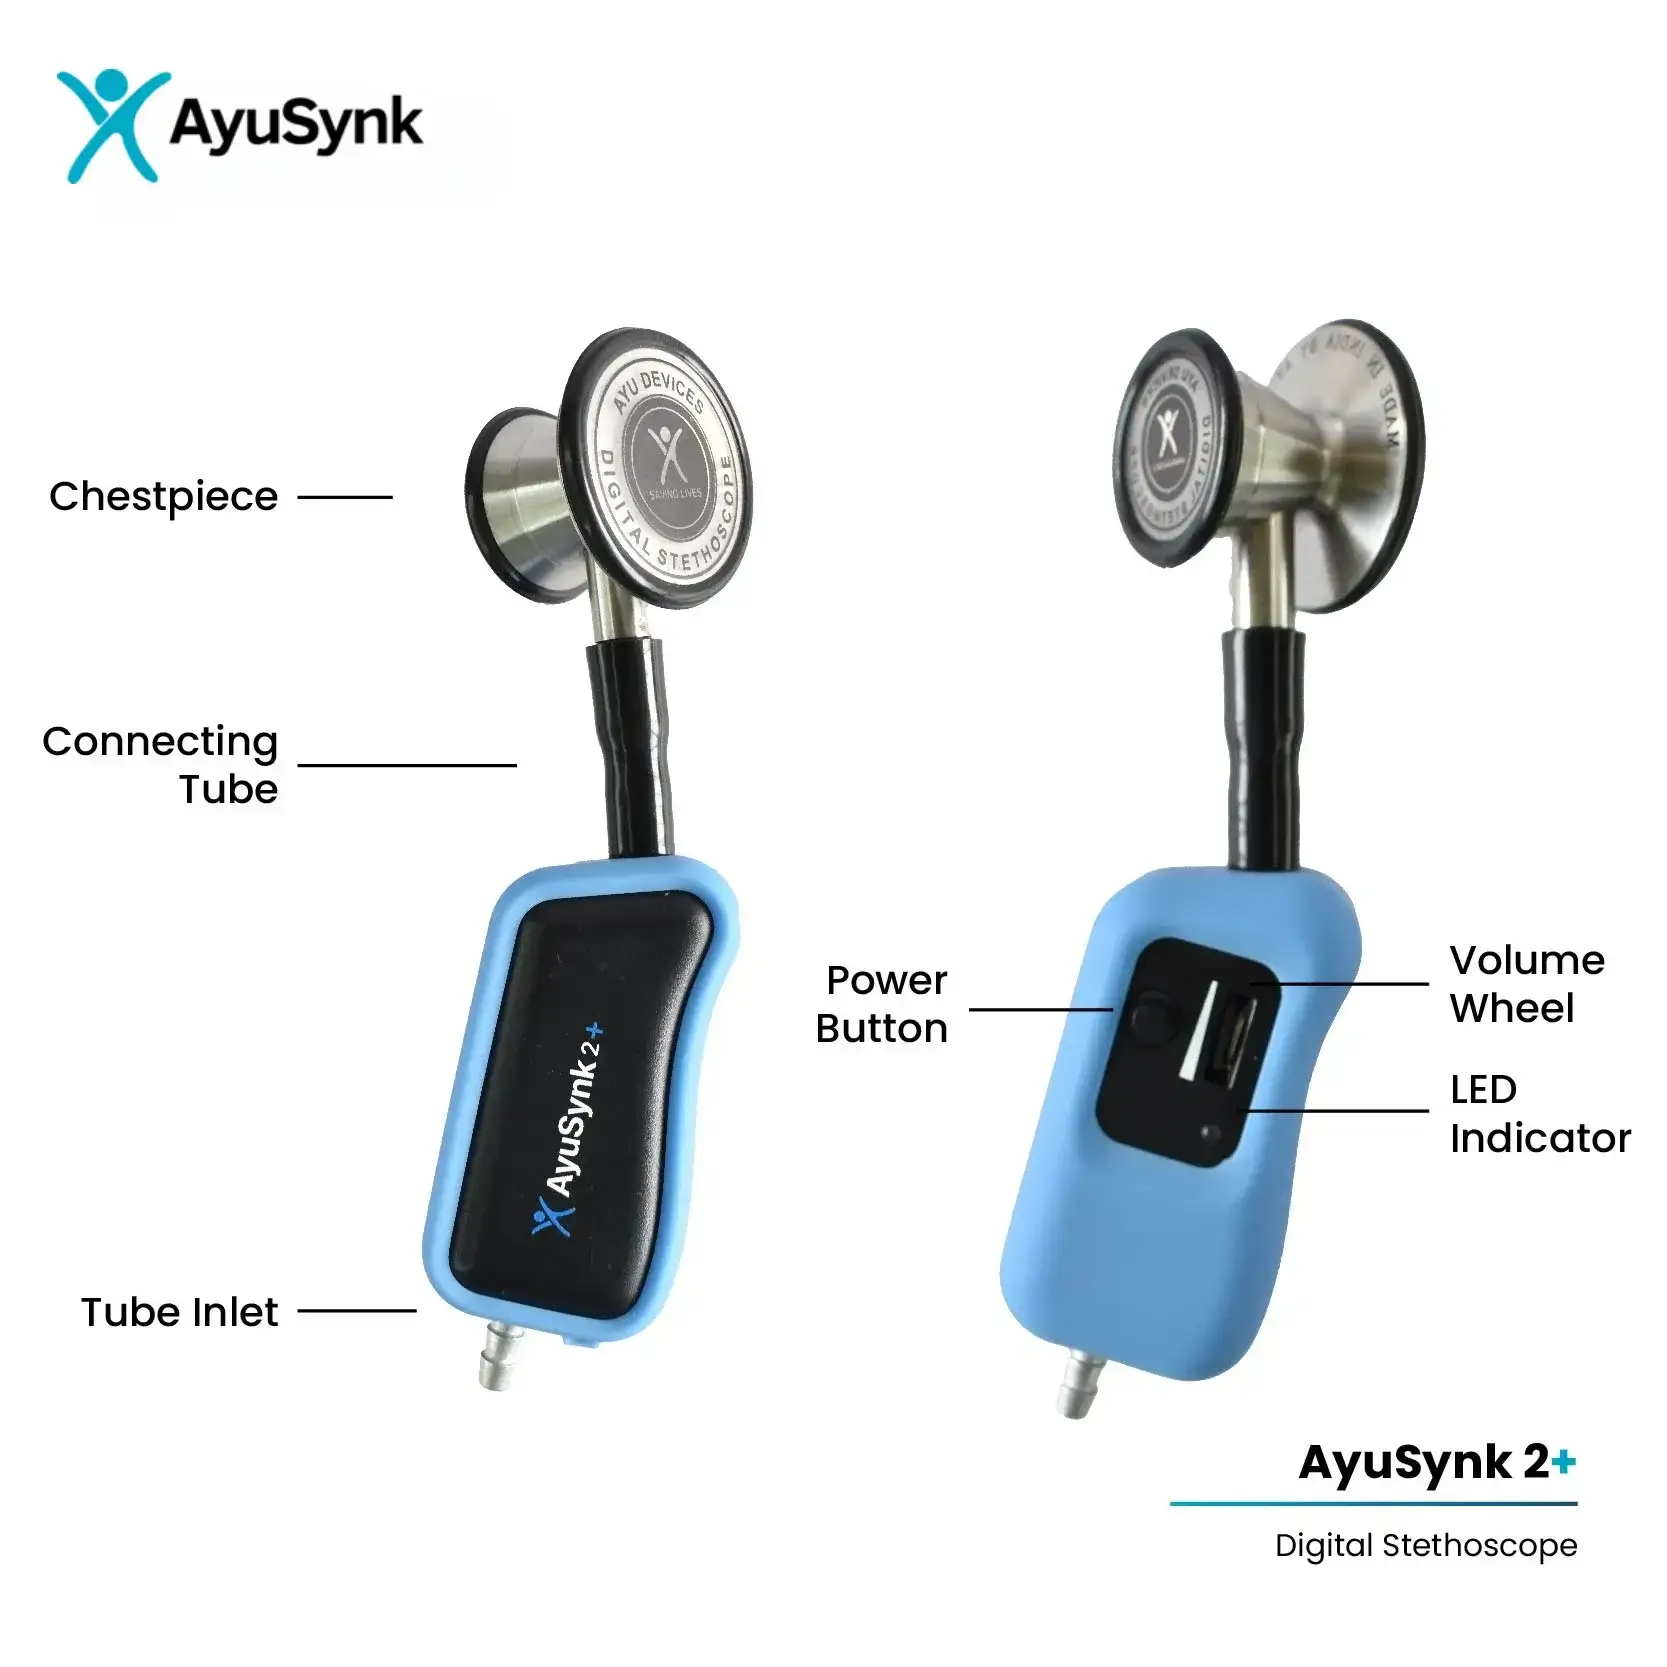 Best Digital Stethoscope for Remote Auscultation - AyuSynk 2Pro